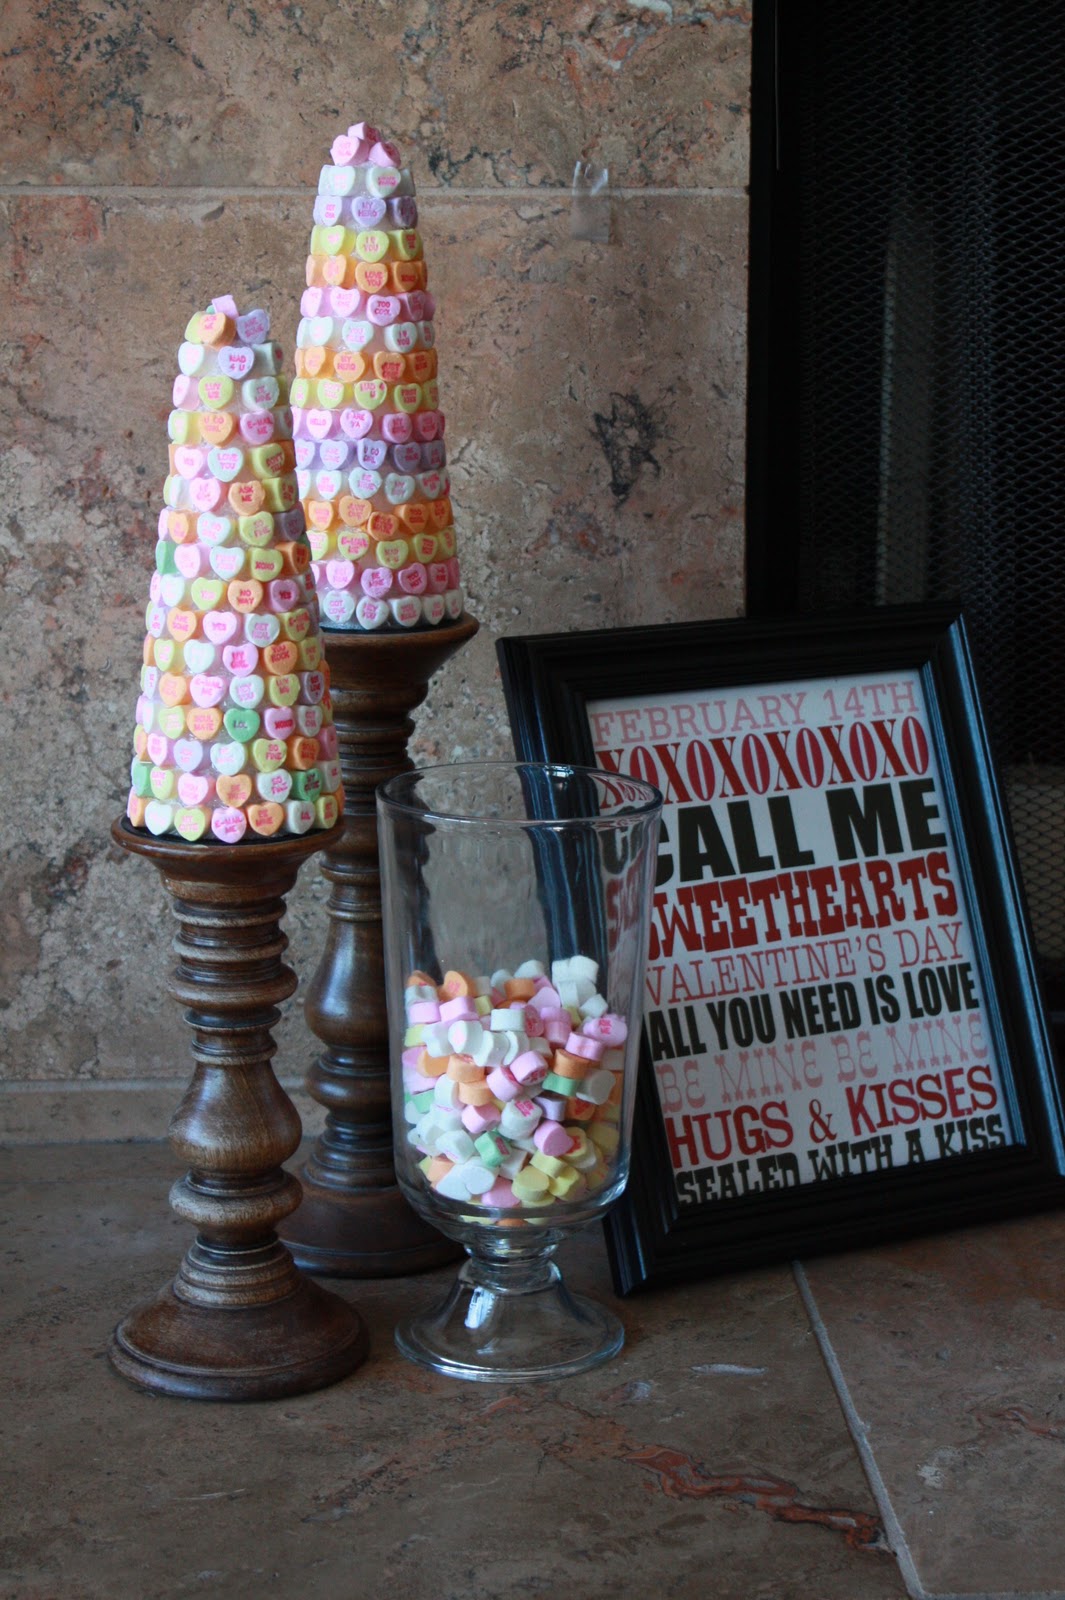 Love these candy topiaries using conversation heart for valentine's. It's perfect for Valentine's candy decor! 